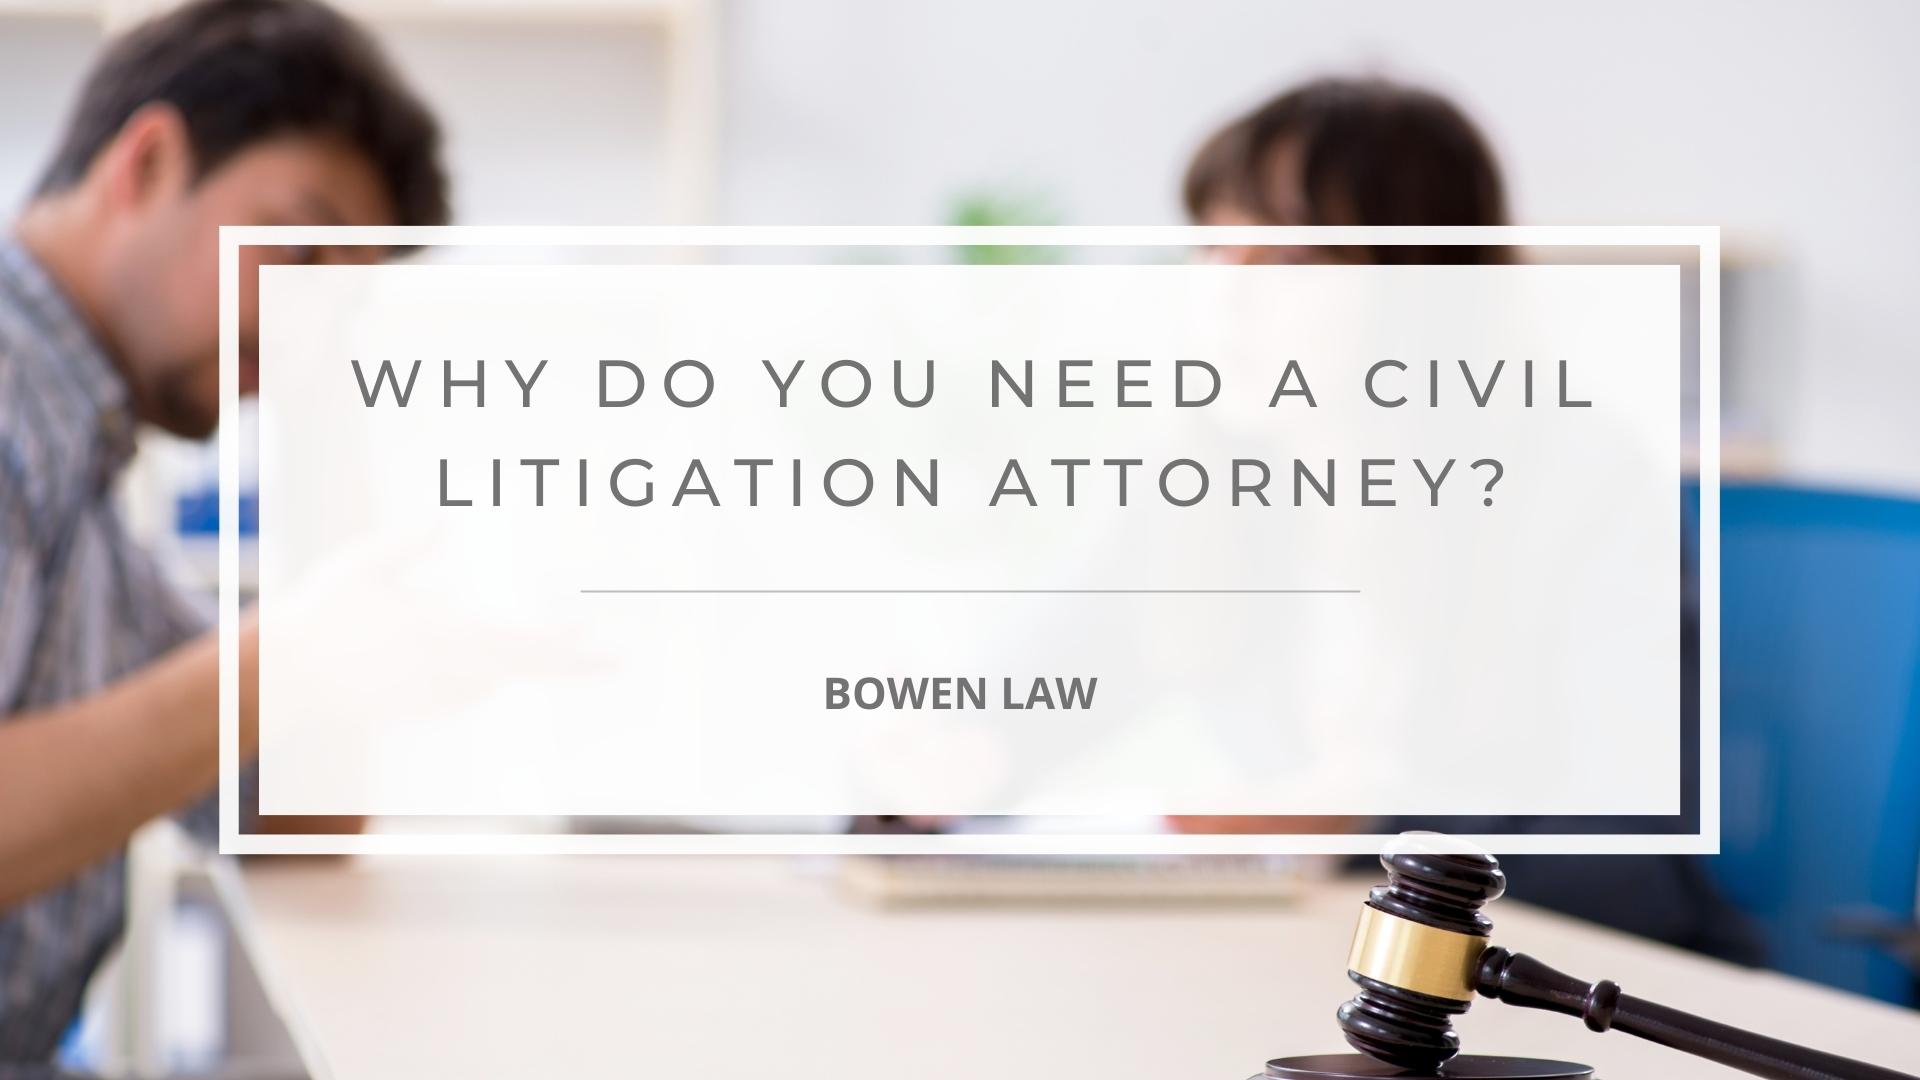 Featured image of why do you need a civil litigation attorney?